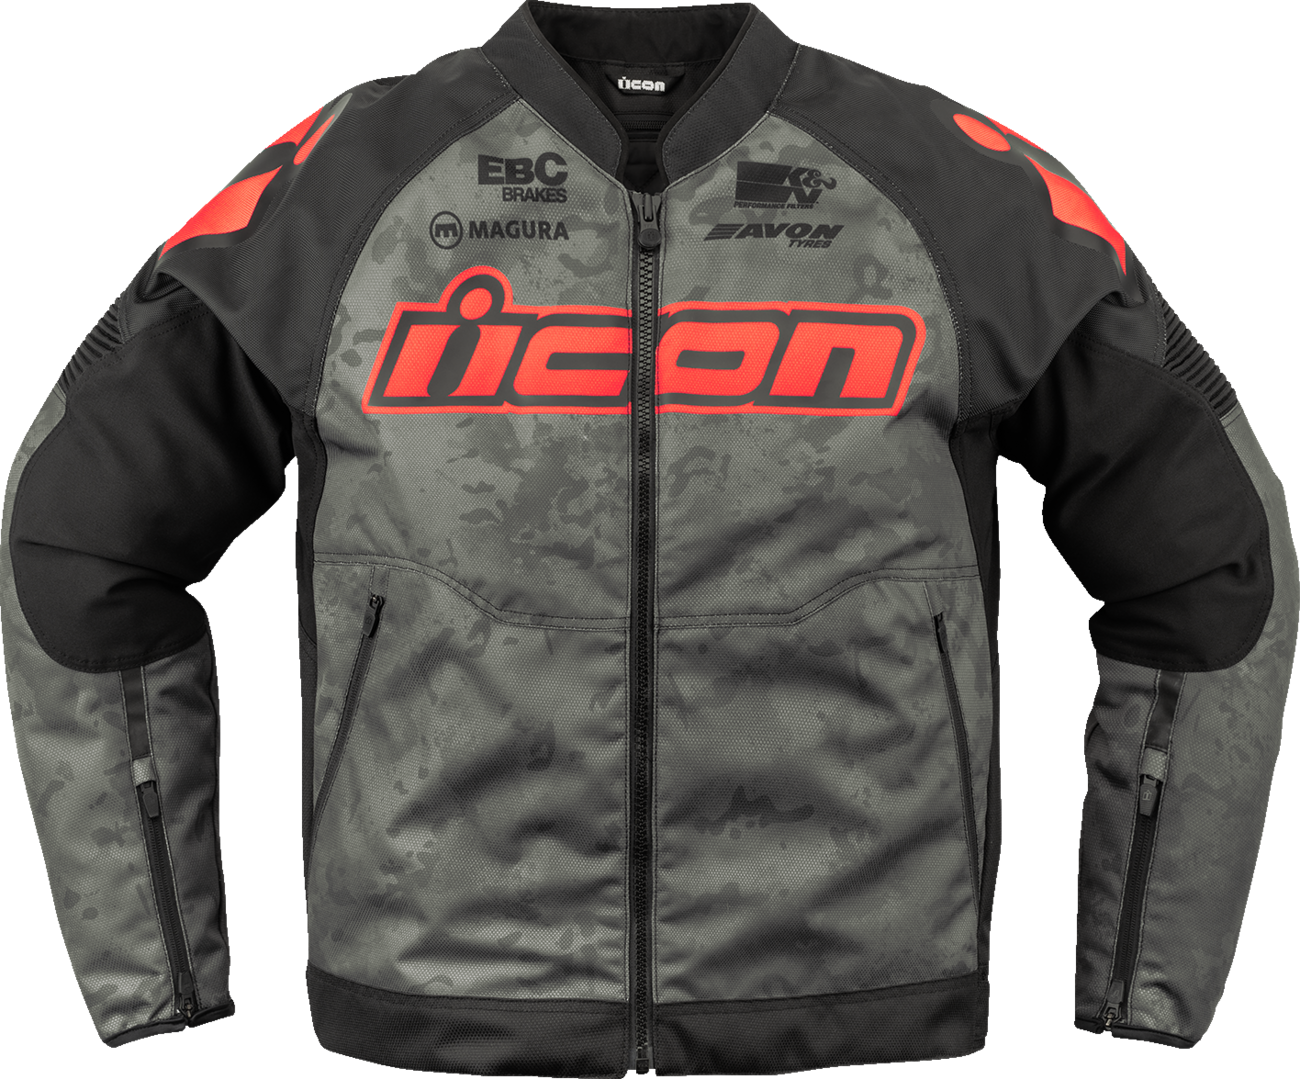 ICON Overlord3™ CE Magnacross Jacket - Gray - Large 2820-6714